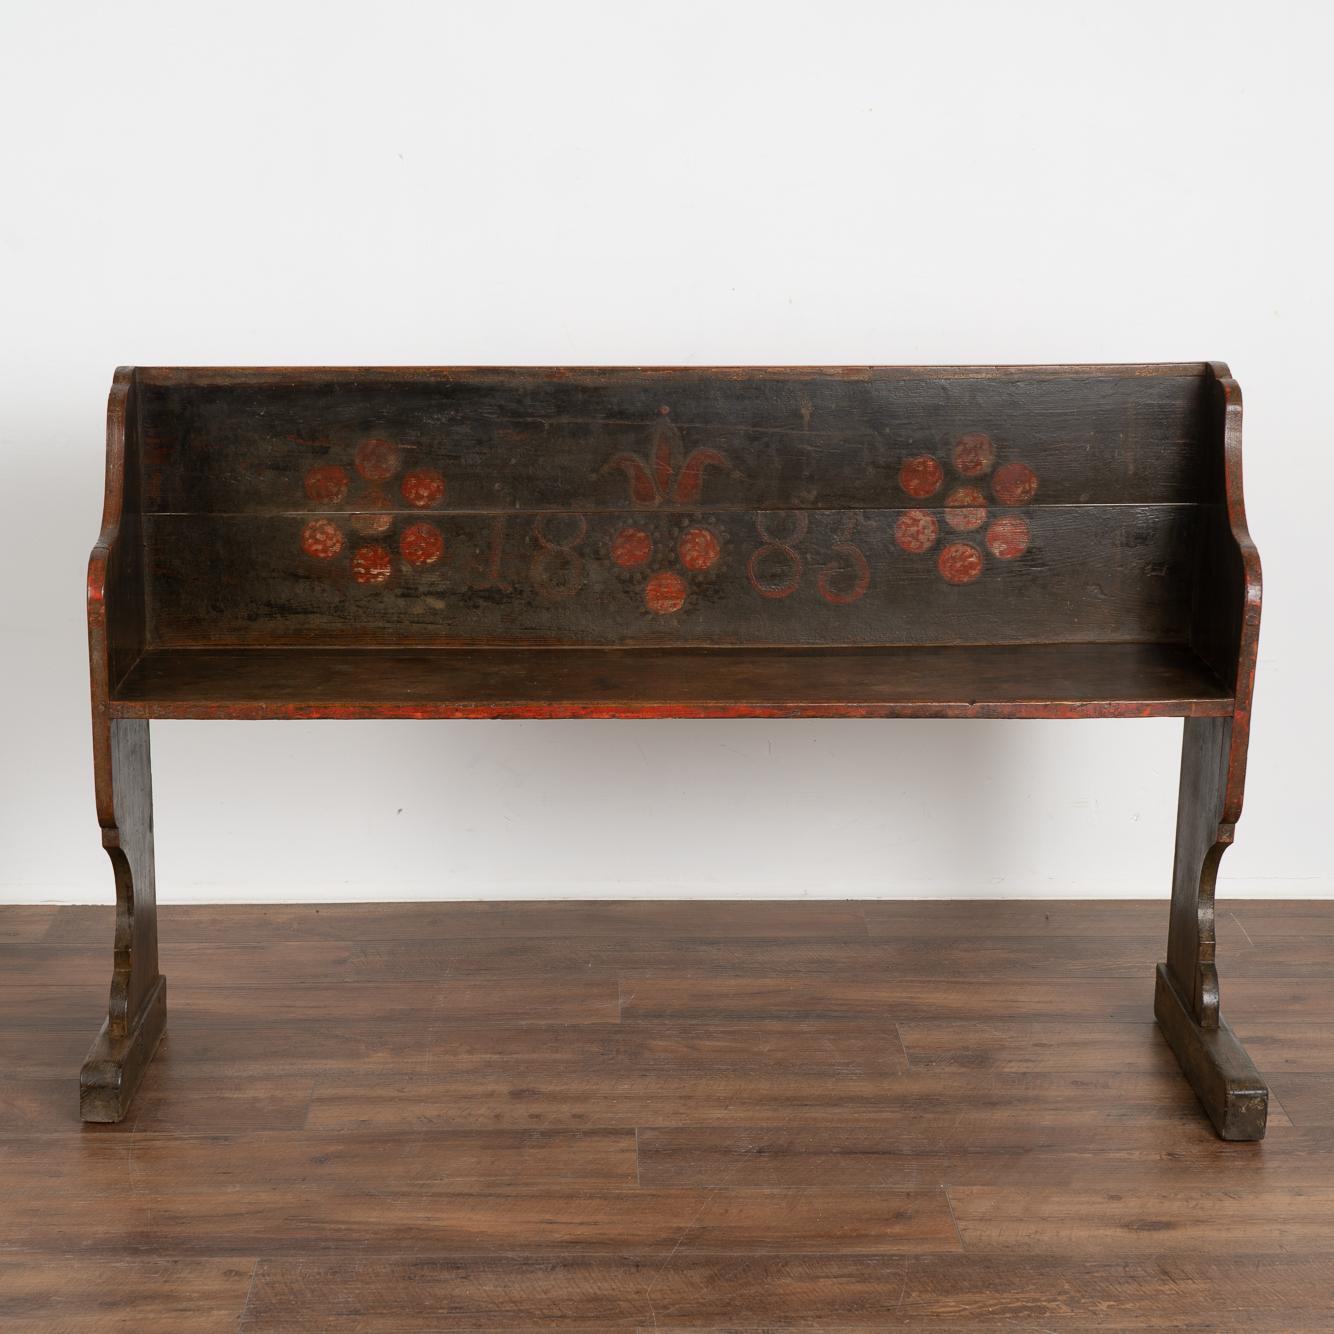 Folk Art Original Hand Painted Narrow Bench with Red Flowers, Hungary, Dated 1883